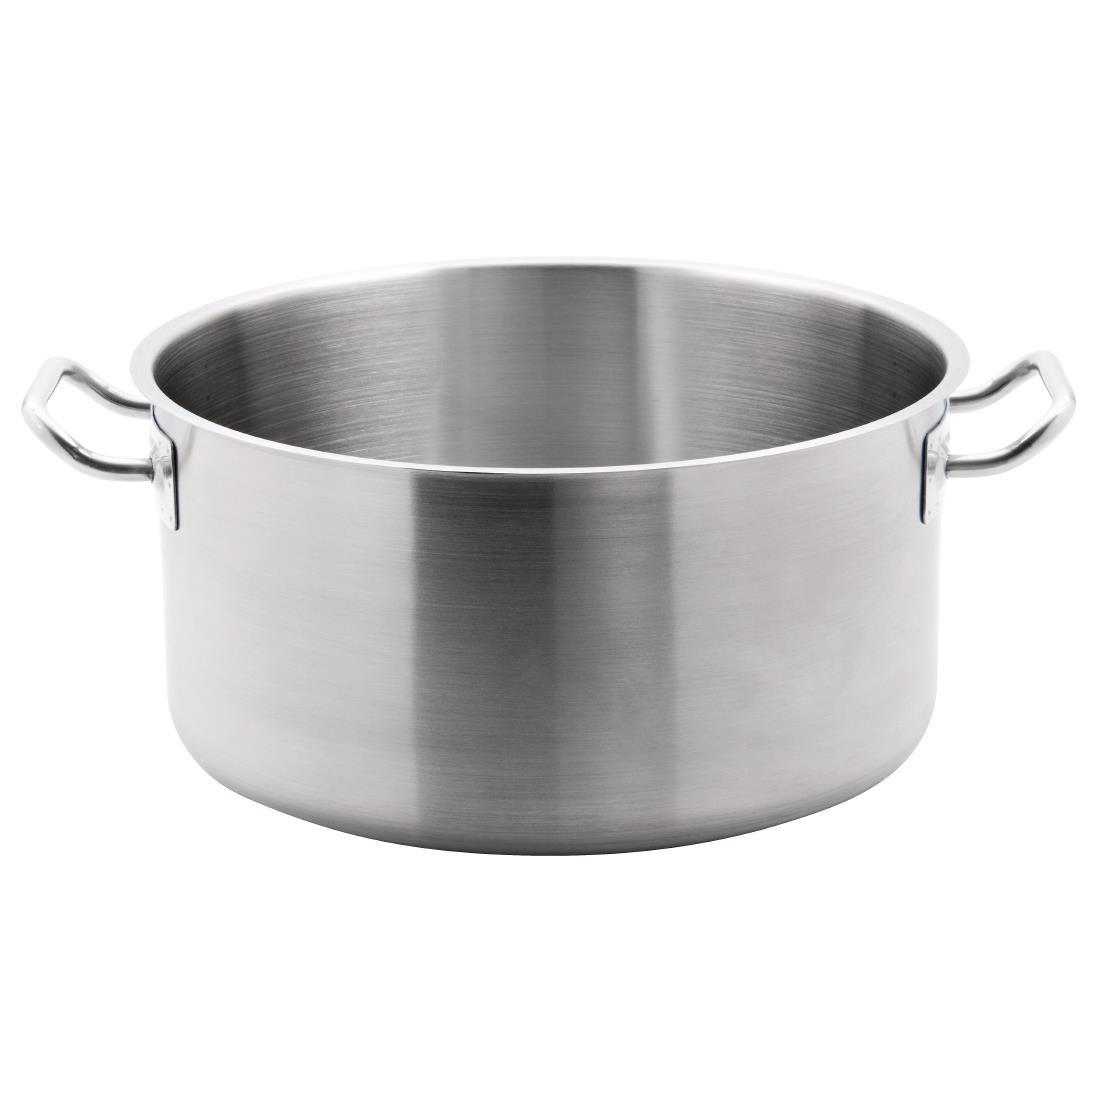 Vogue Stainless Steel Stew Pan 18.5Ltr - T088  - 1